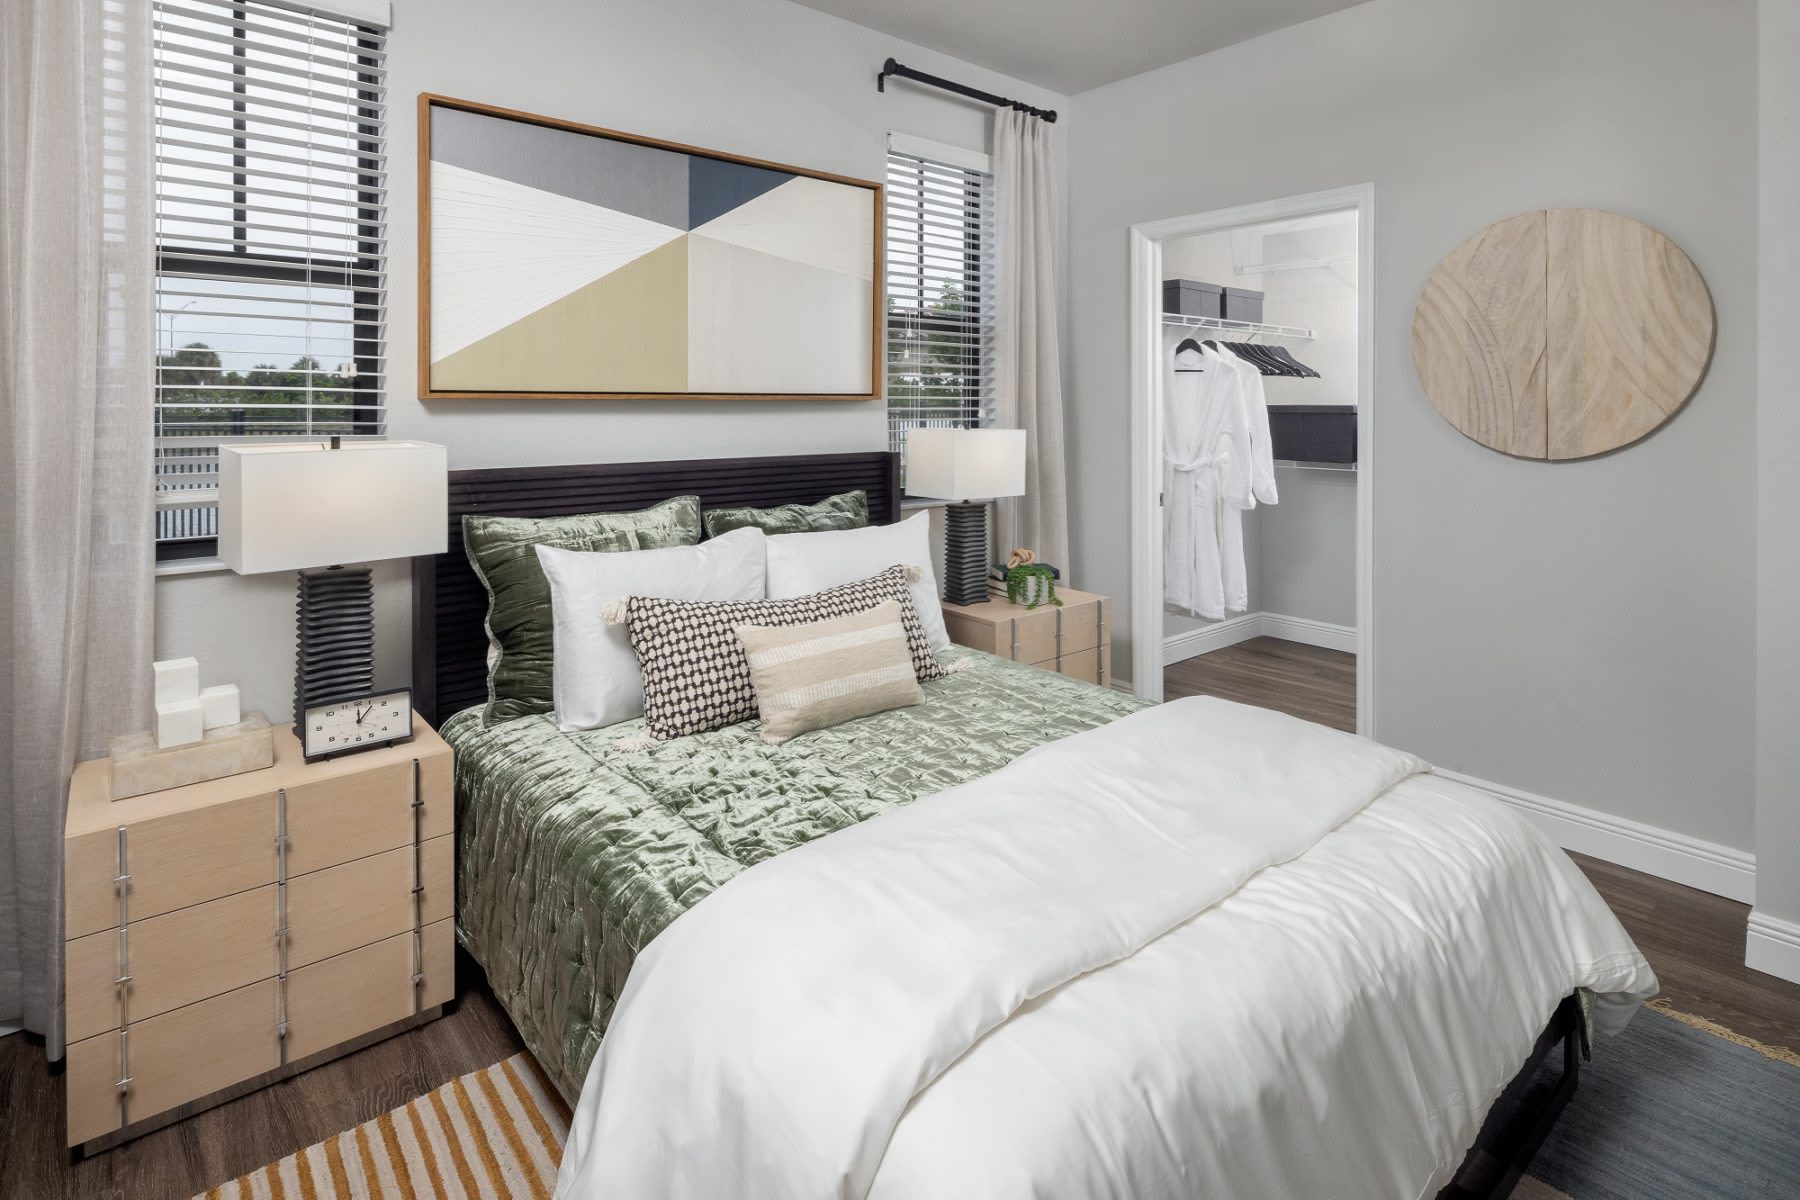 At Locklyn West Palm in West Palm Beach, Florida, a furnished apartment model bedroom features natural light, modern furnishings, and stylish wood-style flooring